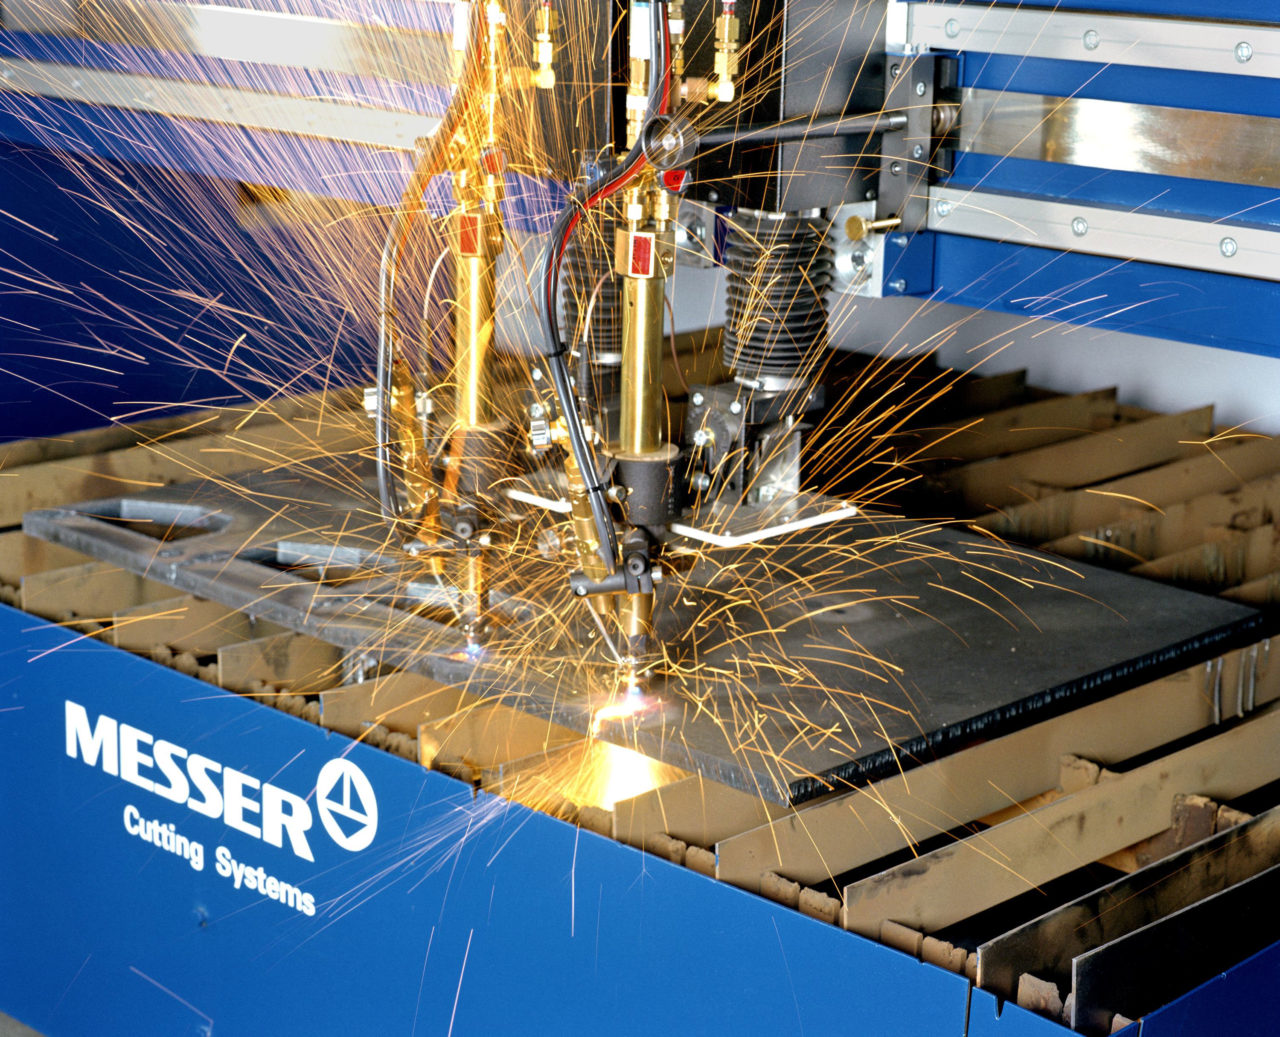 Messer Cutting systems